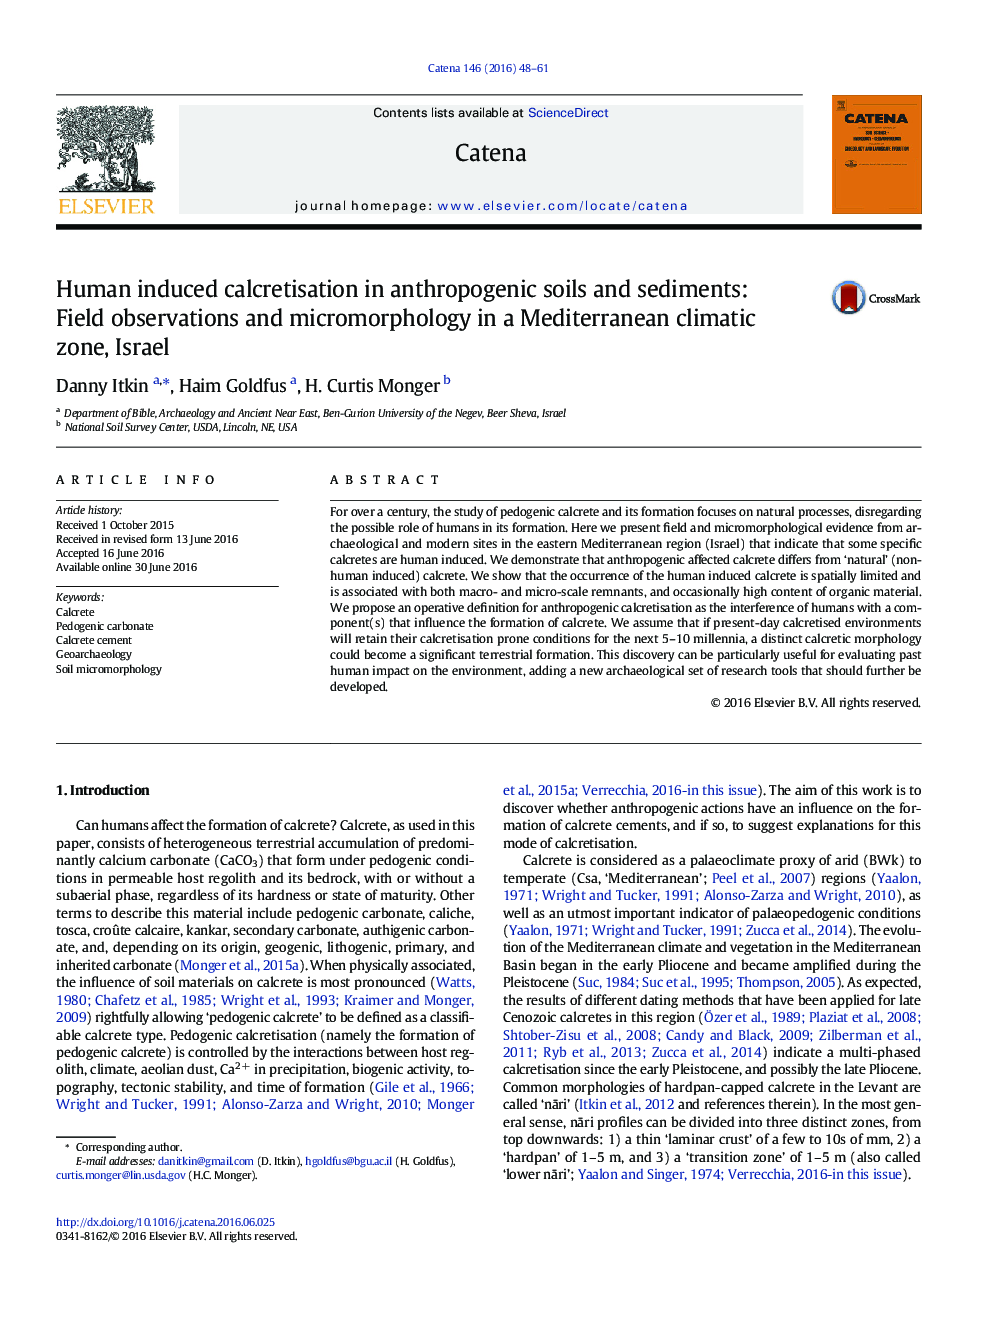 Human induced calcretisation in anthropogenic soils and sediments: Field observations and micromorphology in a Mediterranean climatic zone, Israel